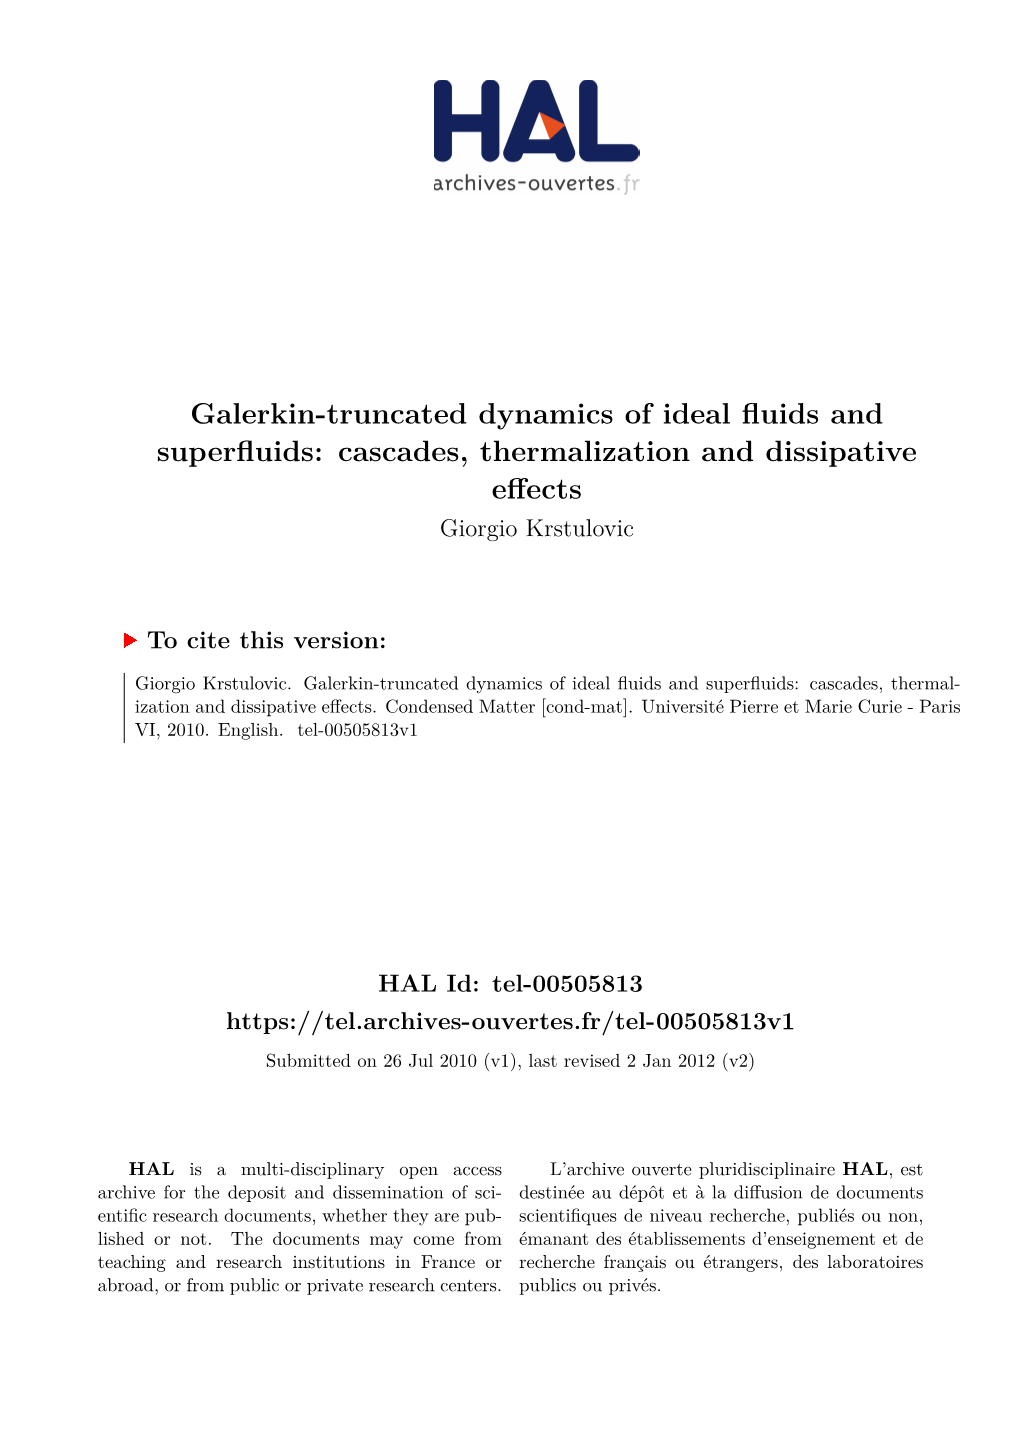 Galerkin-Truncated Dynamics of Ideal Fluids and Superfluids: Cascades, Thermalization and Dissipative Effects Giorgio Krstulovic